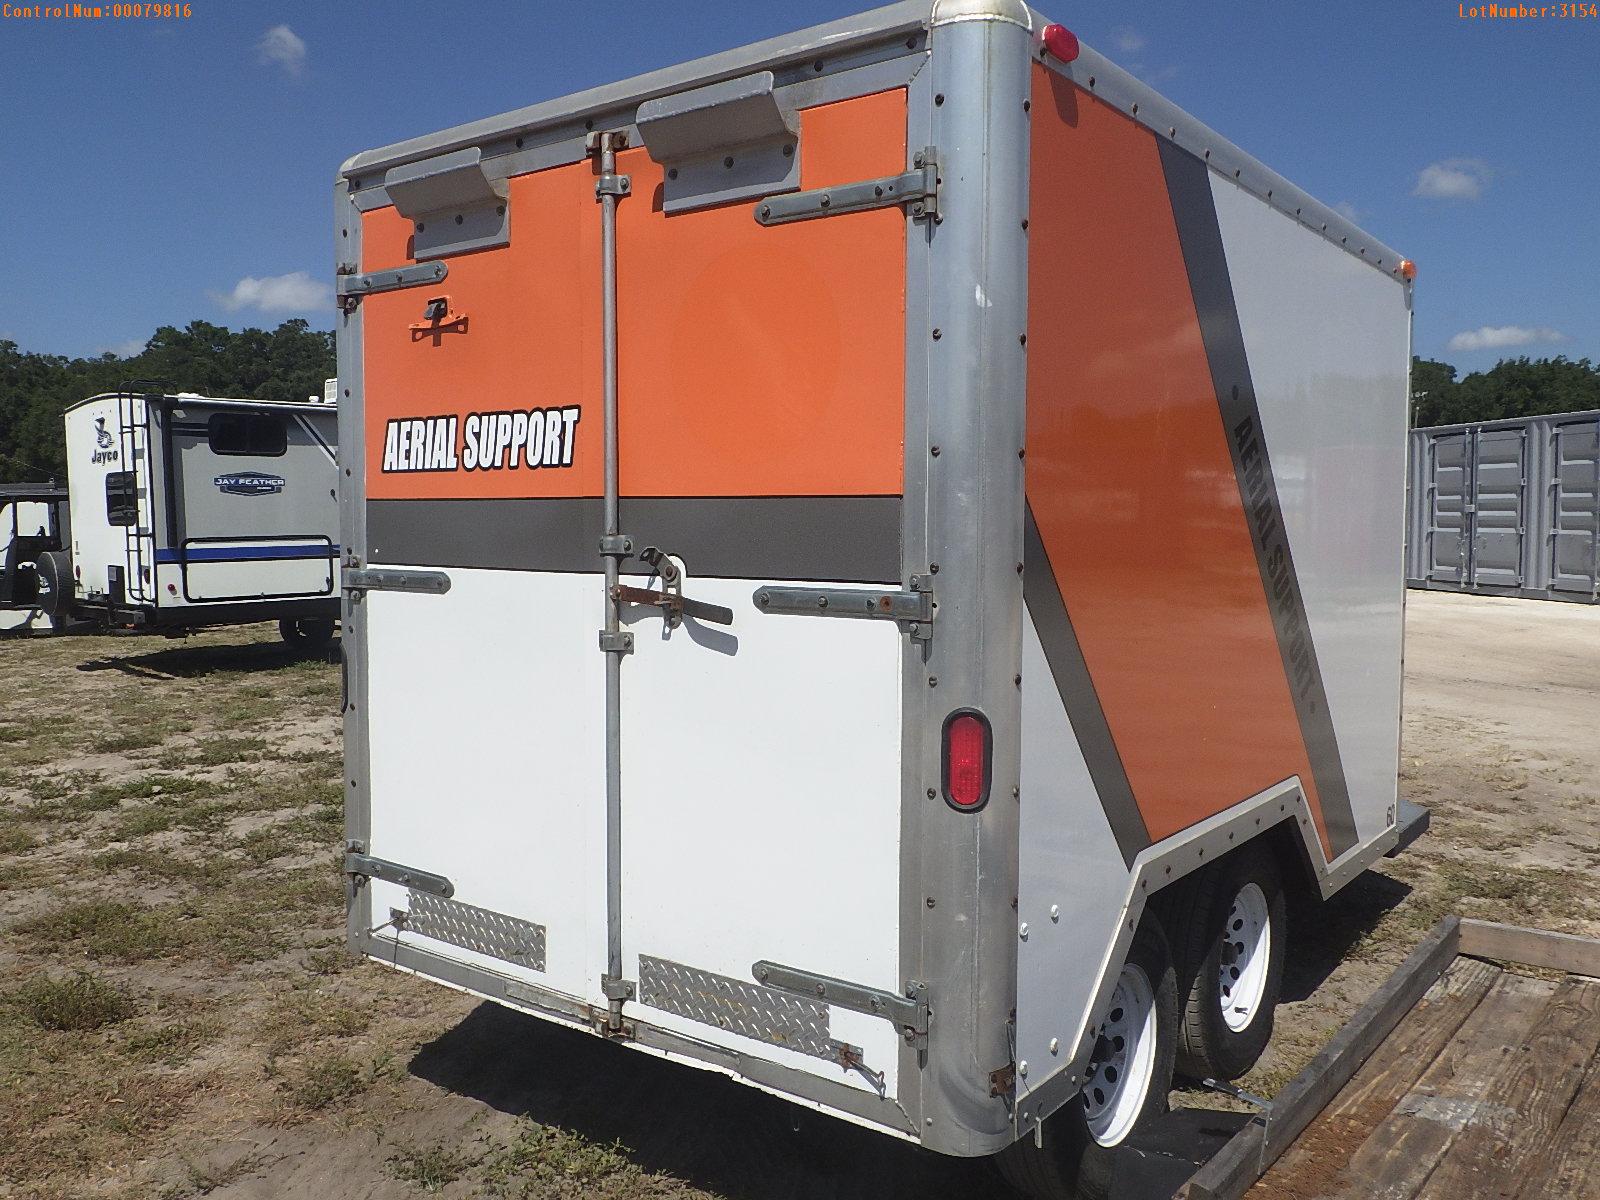 5-03154 (Trailers-Utility enclosed)  Seller: Gov-Pasco County Mosquito Control 1